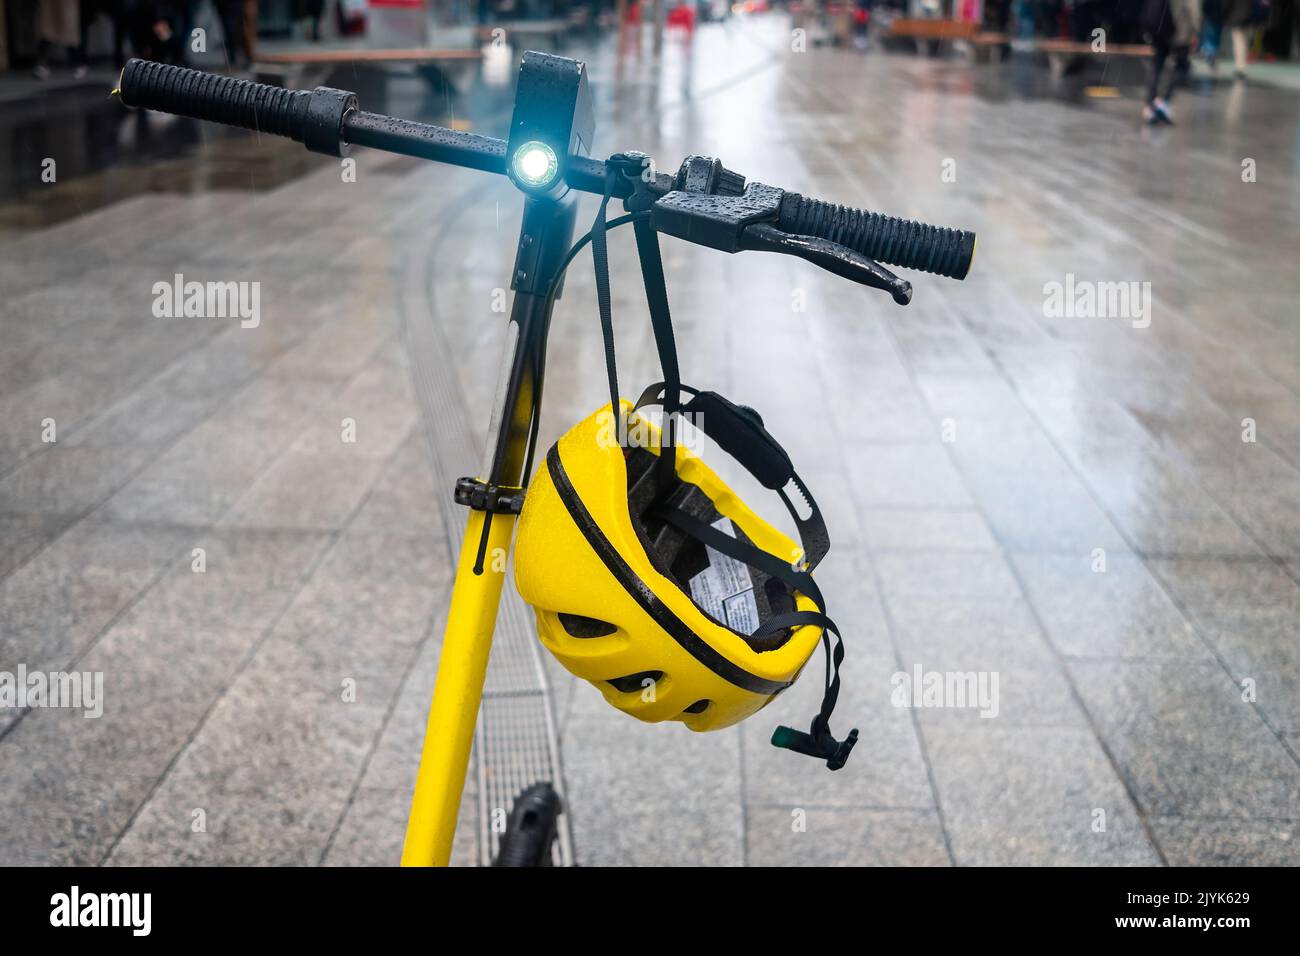 Electric scooter with helmet and light on parked on a street on a rainy day Stock Photo